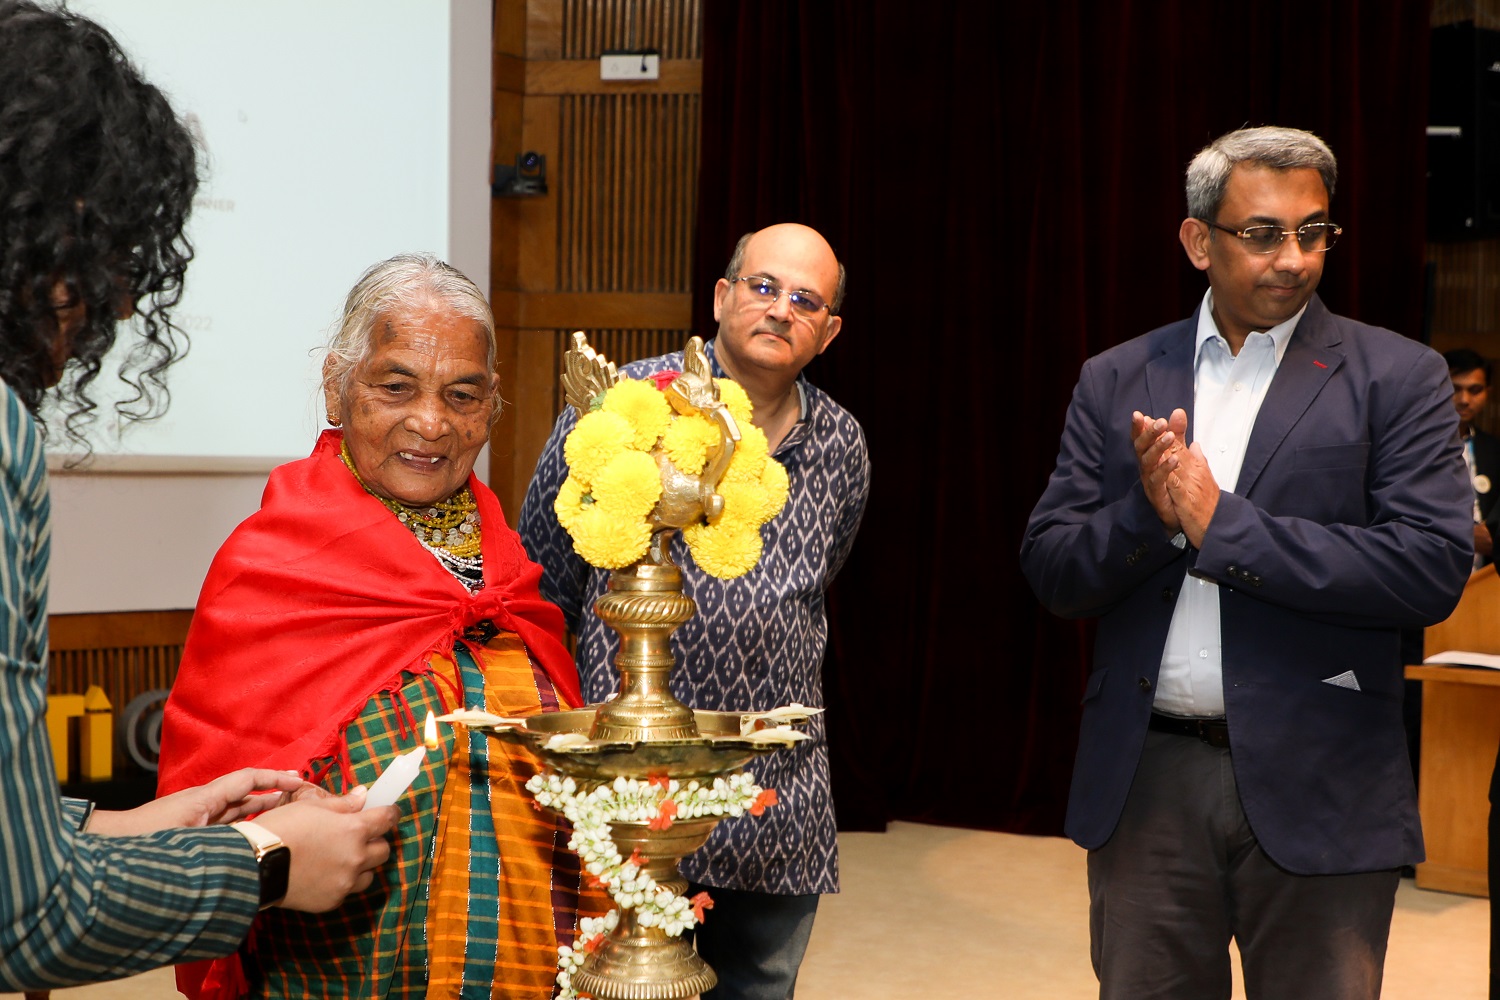 The ceremonial lamp is lit by Smt Tulsi Gowda. IIMB Director Professor Rishikesha T Krishnan, Professor Allen P Ugargol, Chairperson, PGPEM, and Ms Shreyas Seethapathy,  President, Student Affairs Council, PGPEM, look on.